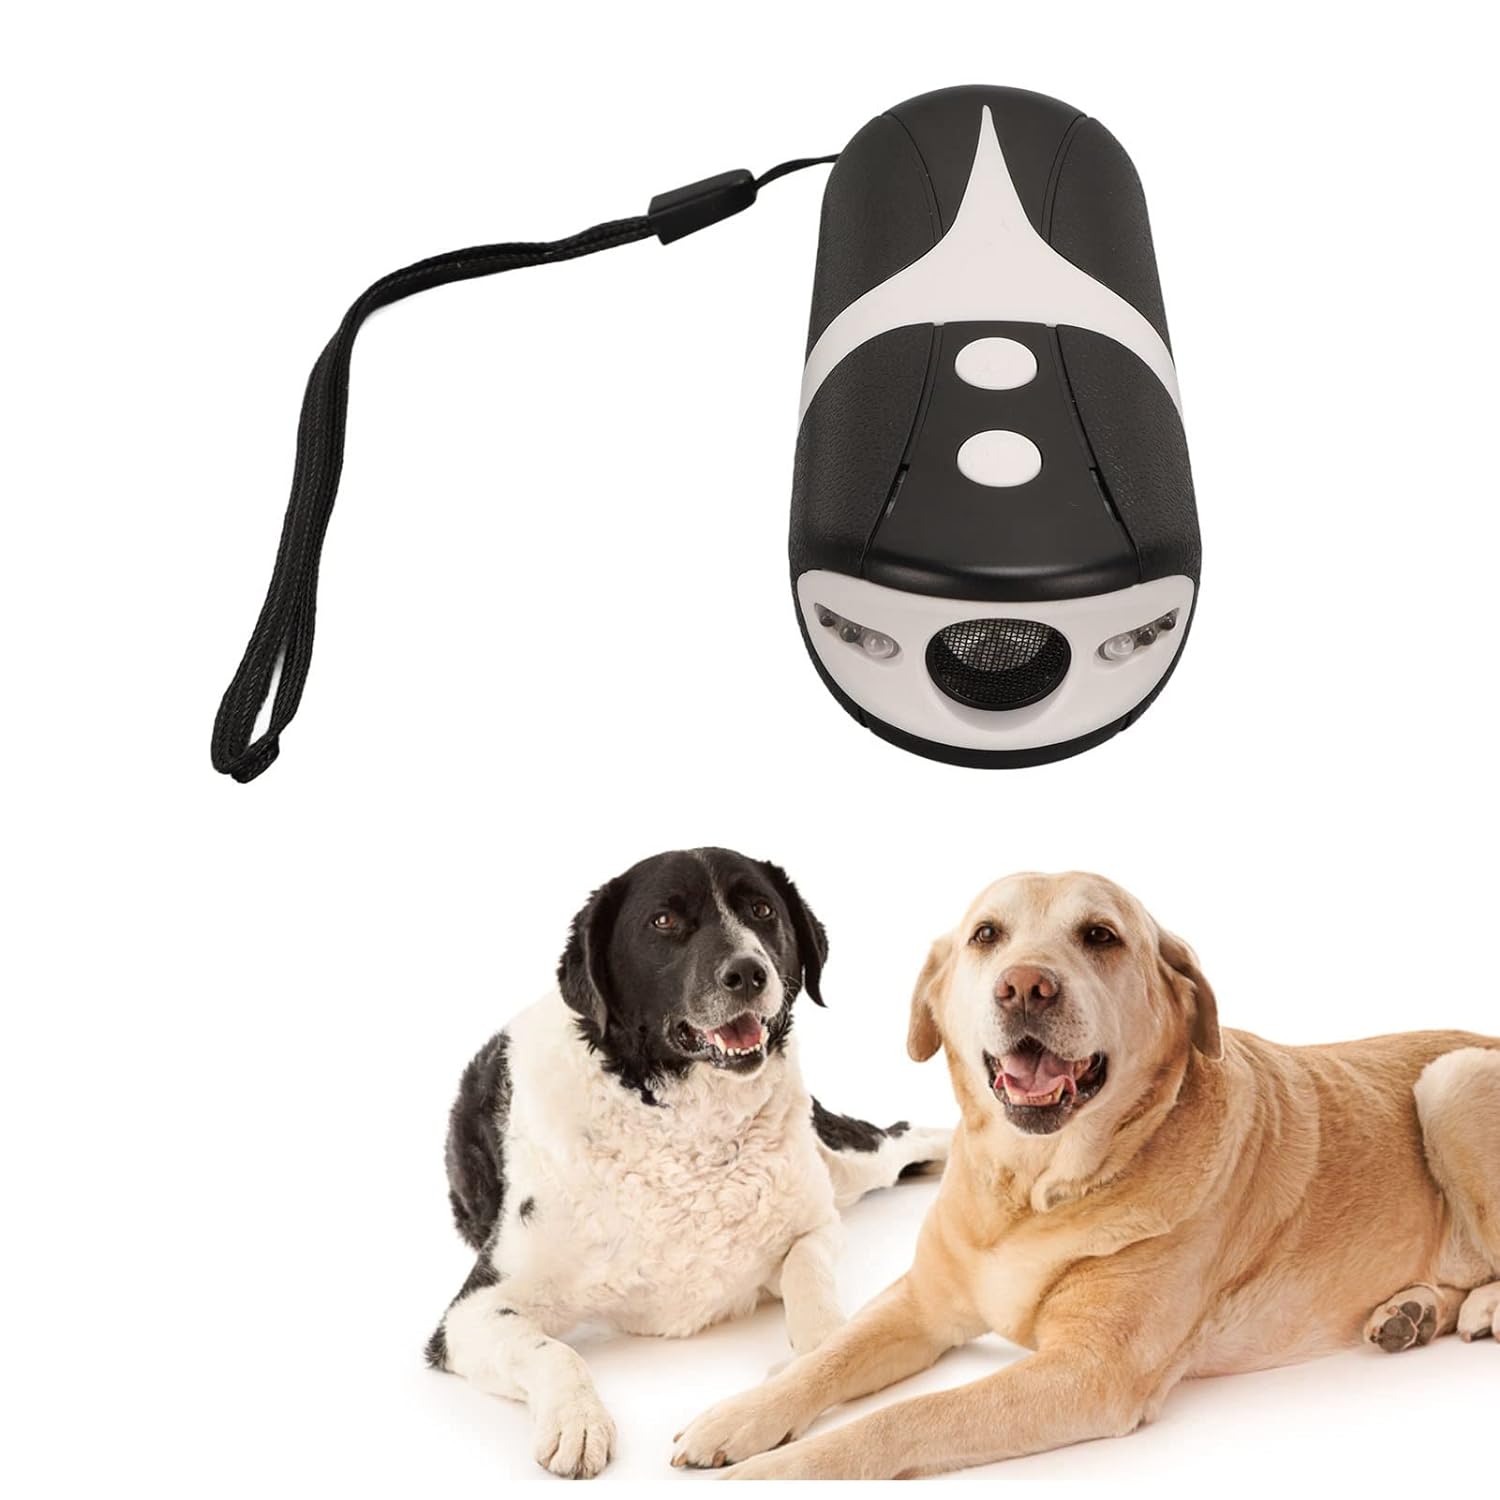 Ultrasonic Bark Control Device, Safe 16.5ft Dog Bark Deterrent Device, Portable Beep Function for Outdoor Training